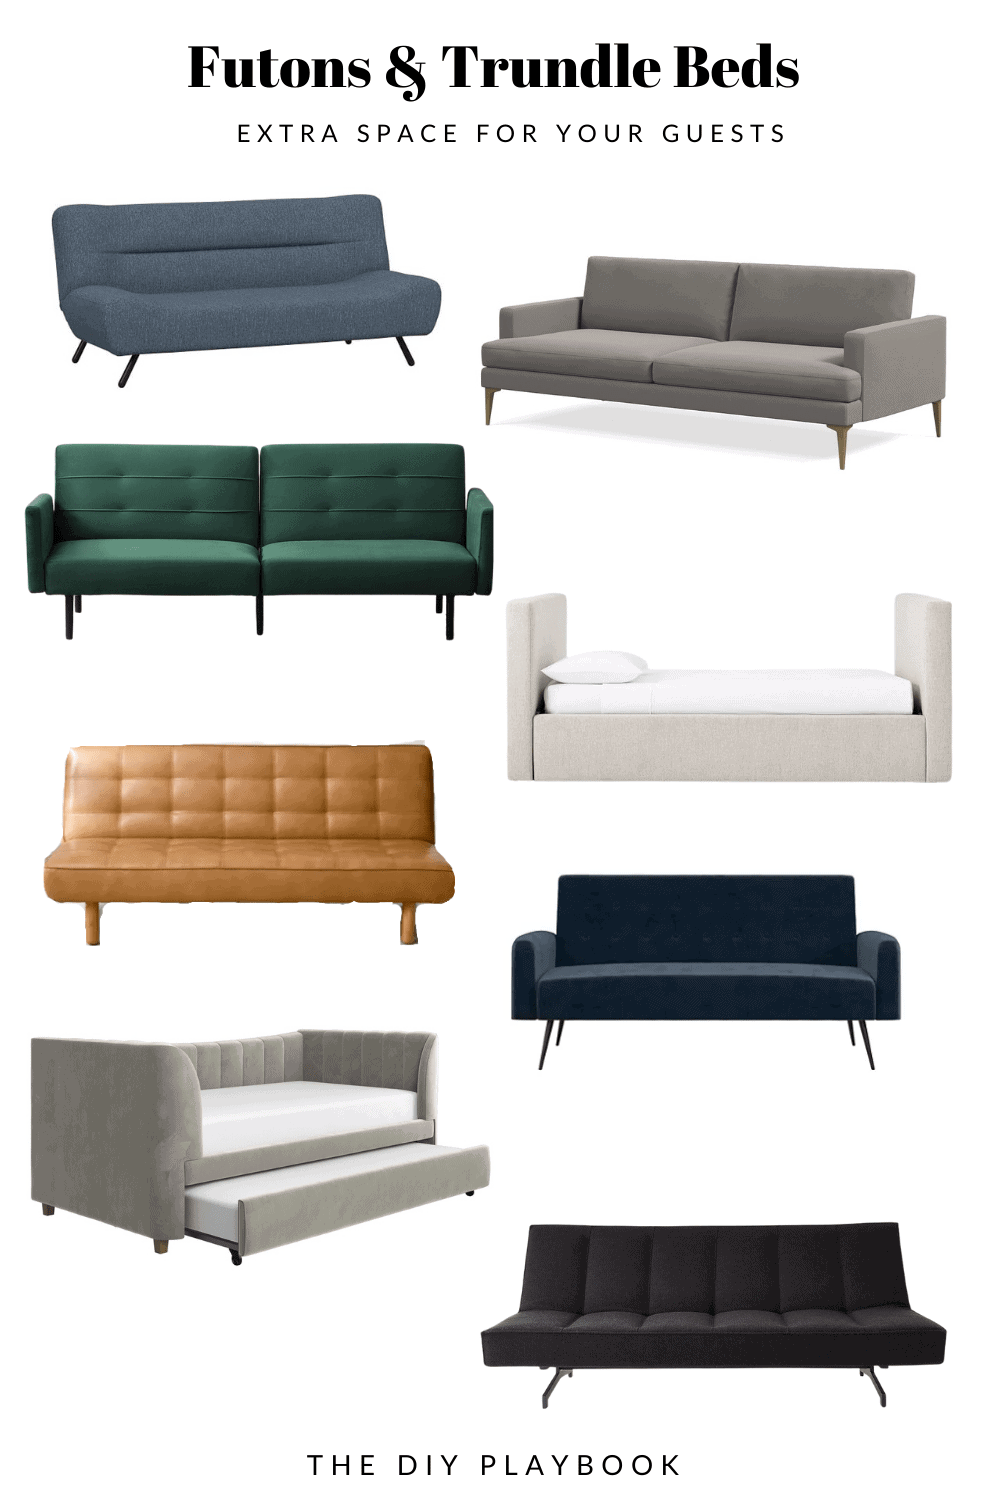 top sofa beds, futons, and trundle beds